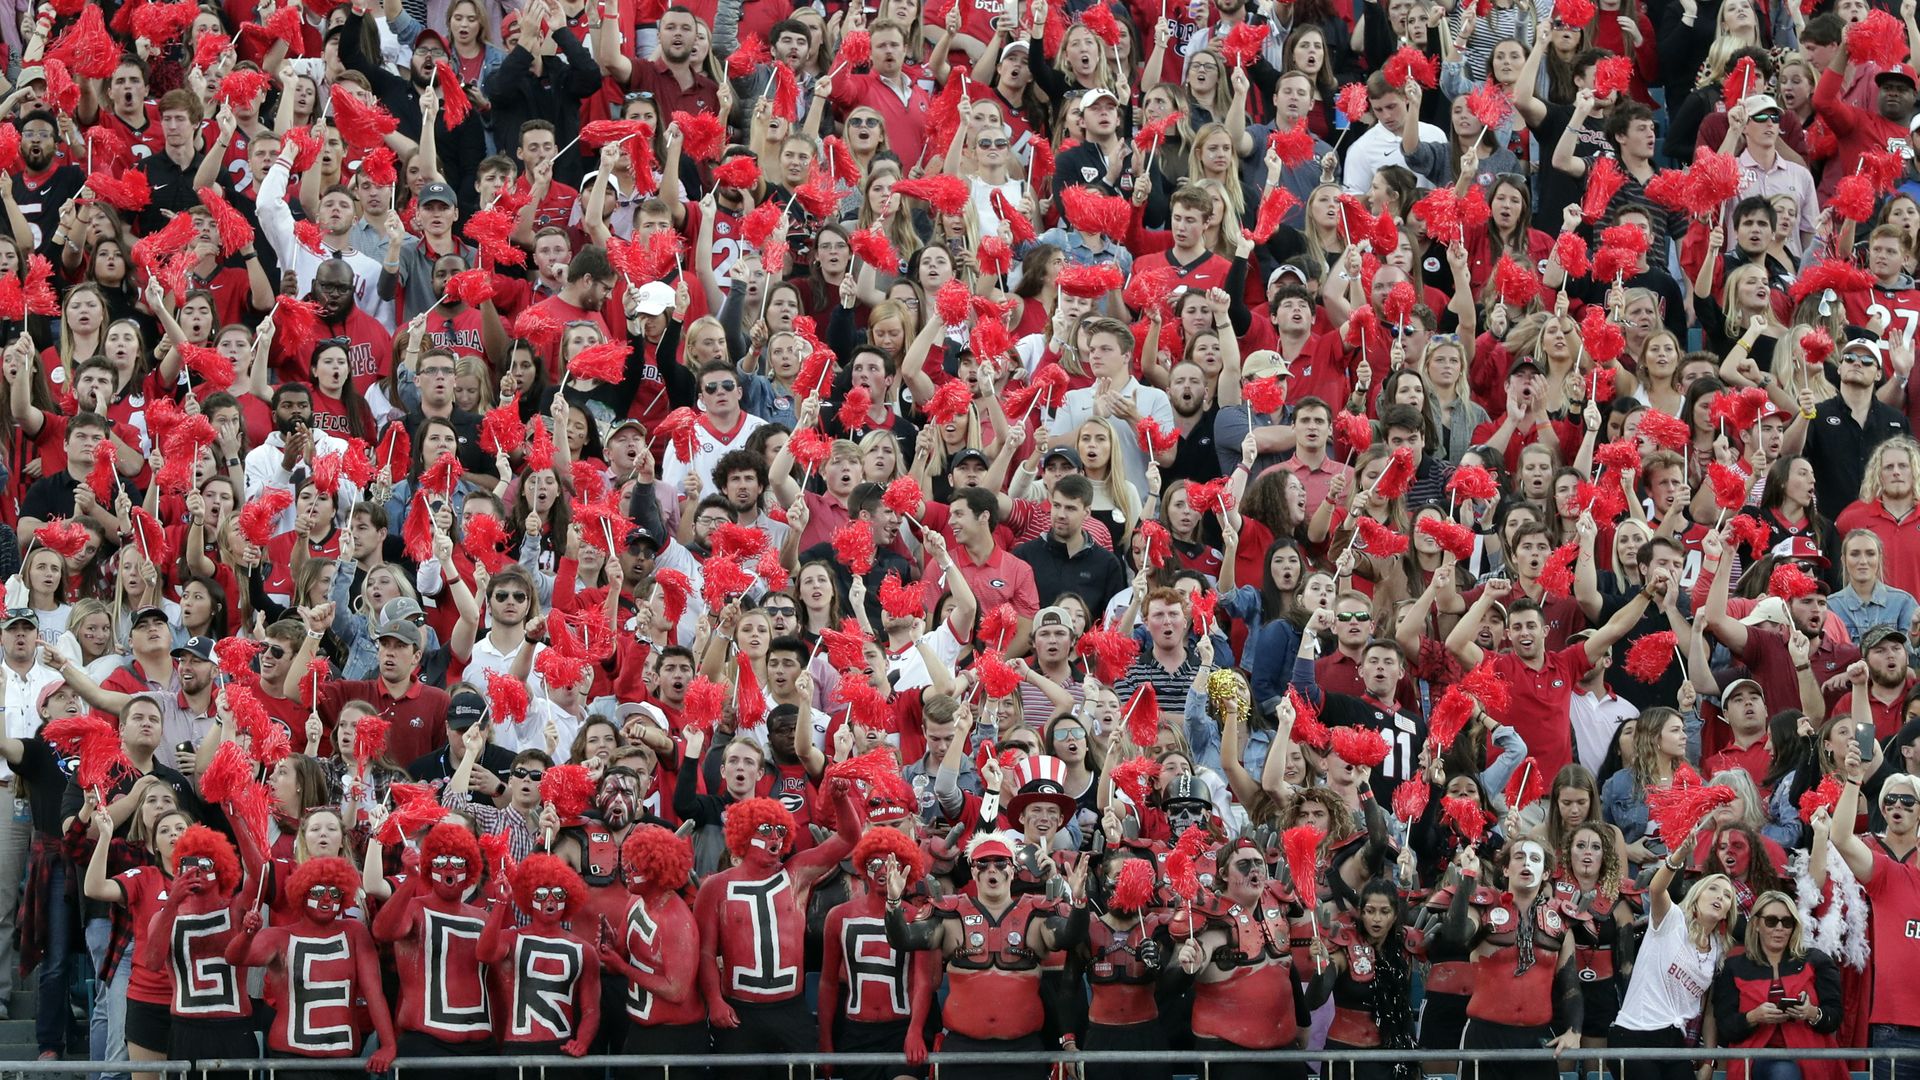 Fans wearing red, black, and white stand in the UGA fan section and cheer